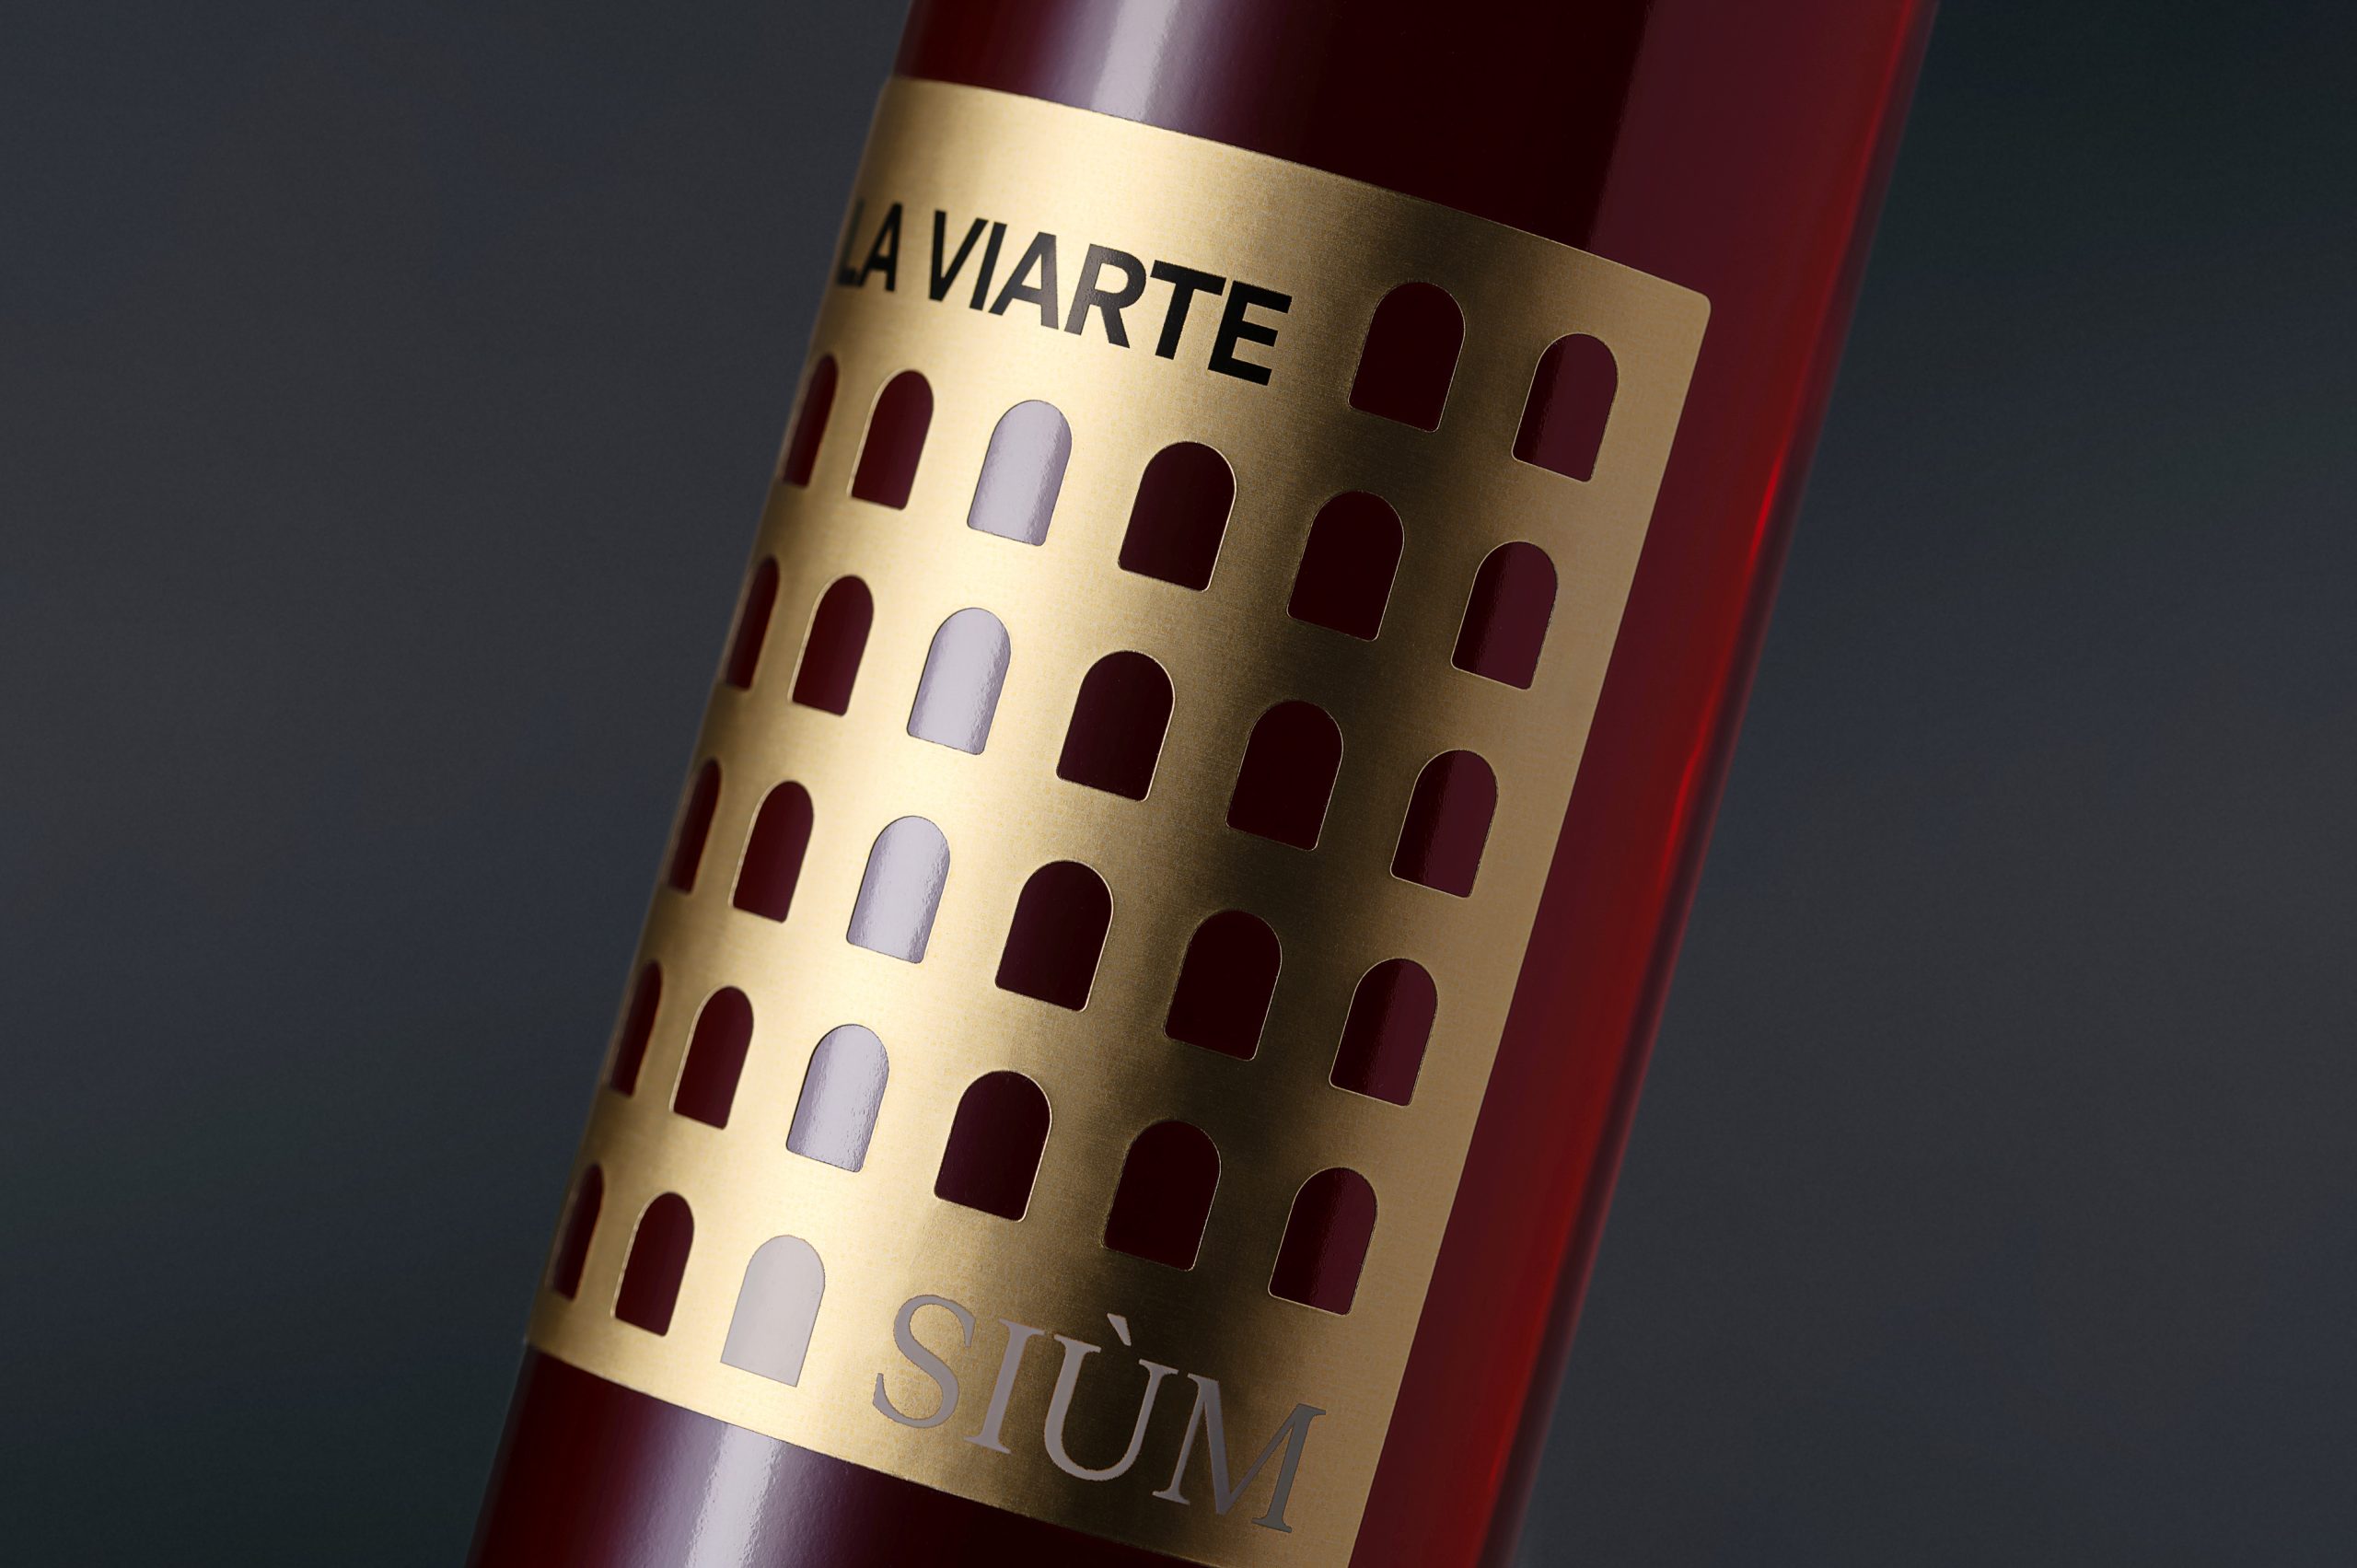 La Viarte Opens a Door to an Expansive New Look with a Redesigned Gold Label for Siùm